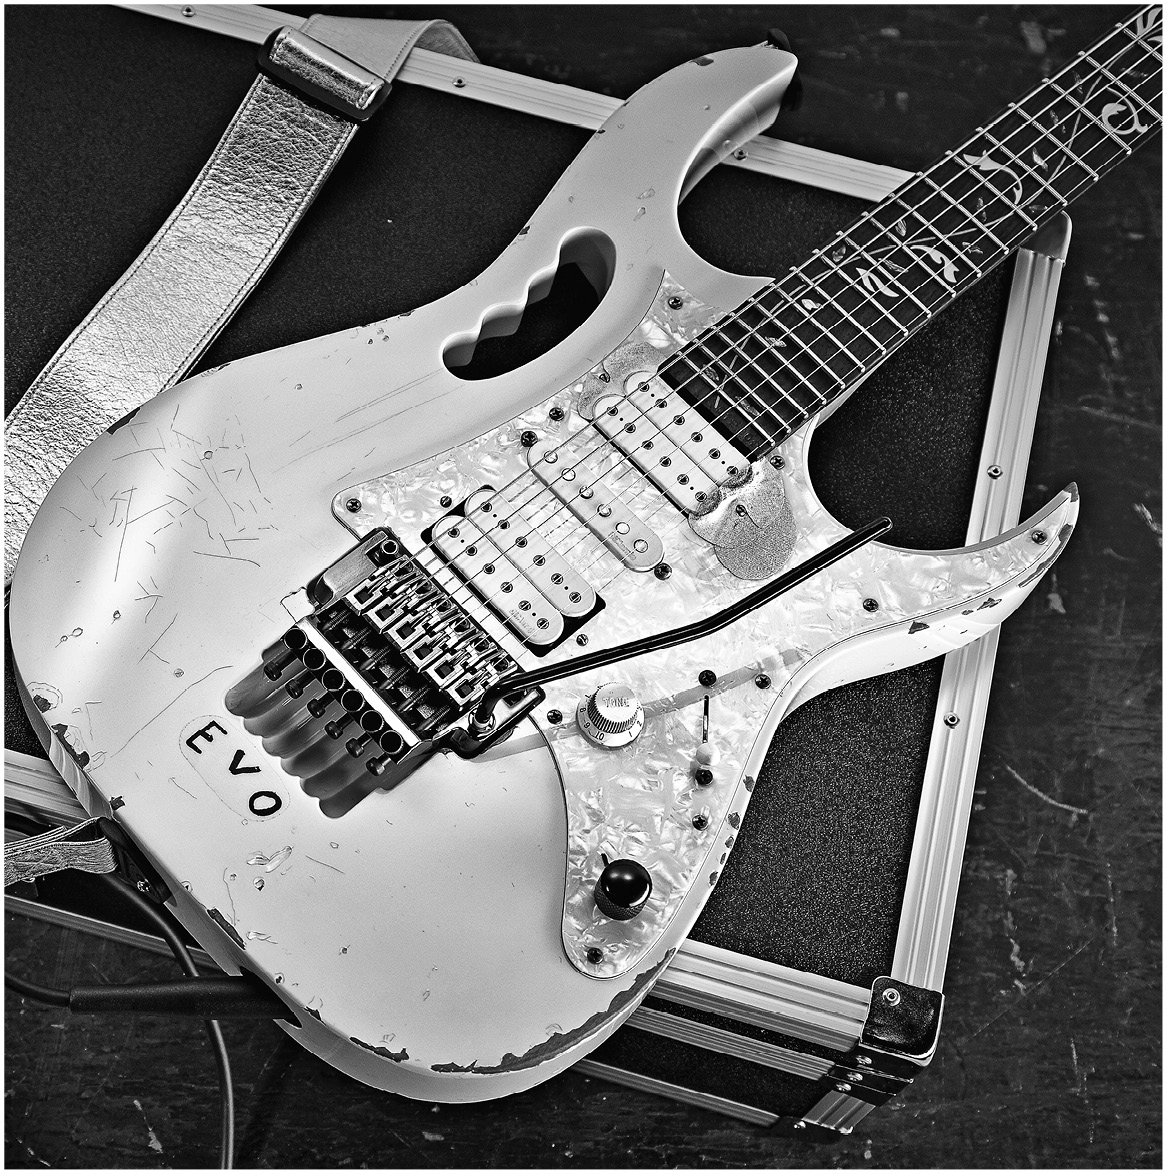 An Ibanez JEM-EVO 25th Anniversary electric guitar photographed during a studio shoot for Guitarist Magazine, August 17, 2012. (Photo by Jesse Wild/Guitarist Magazine via Getty Images)